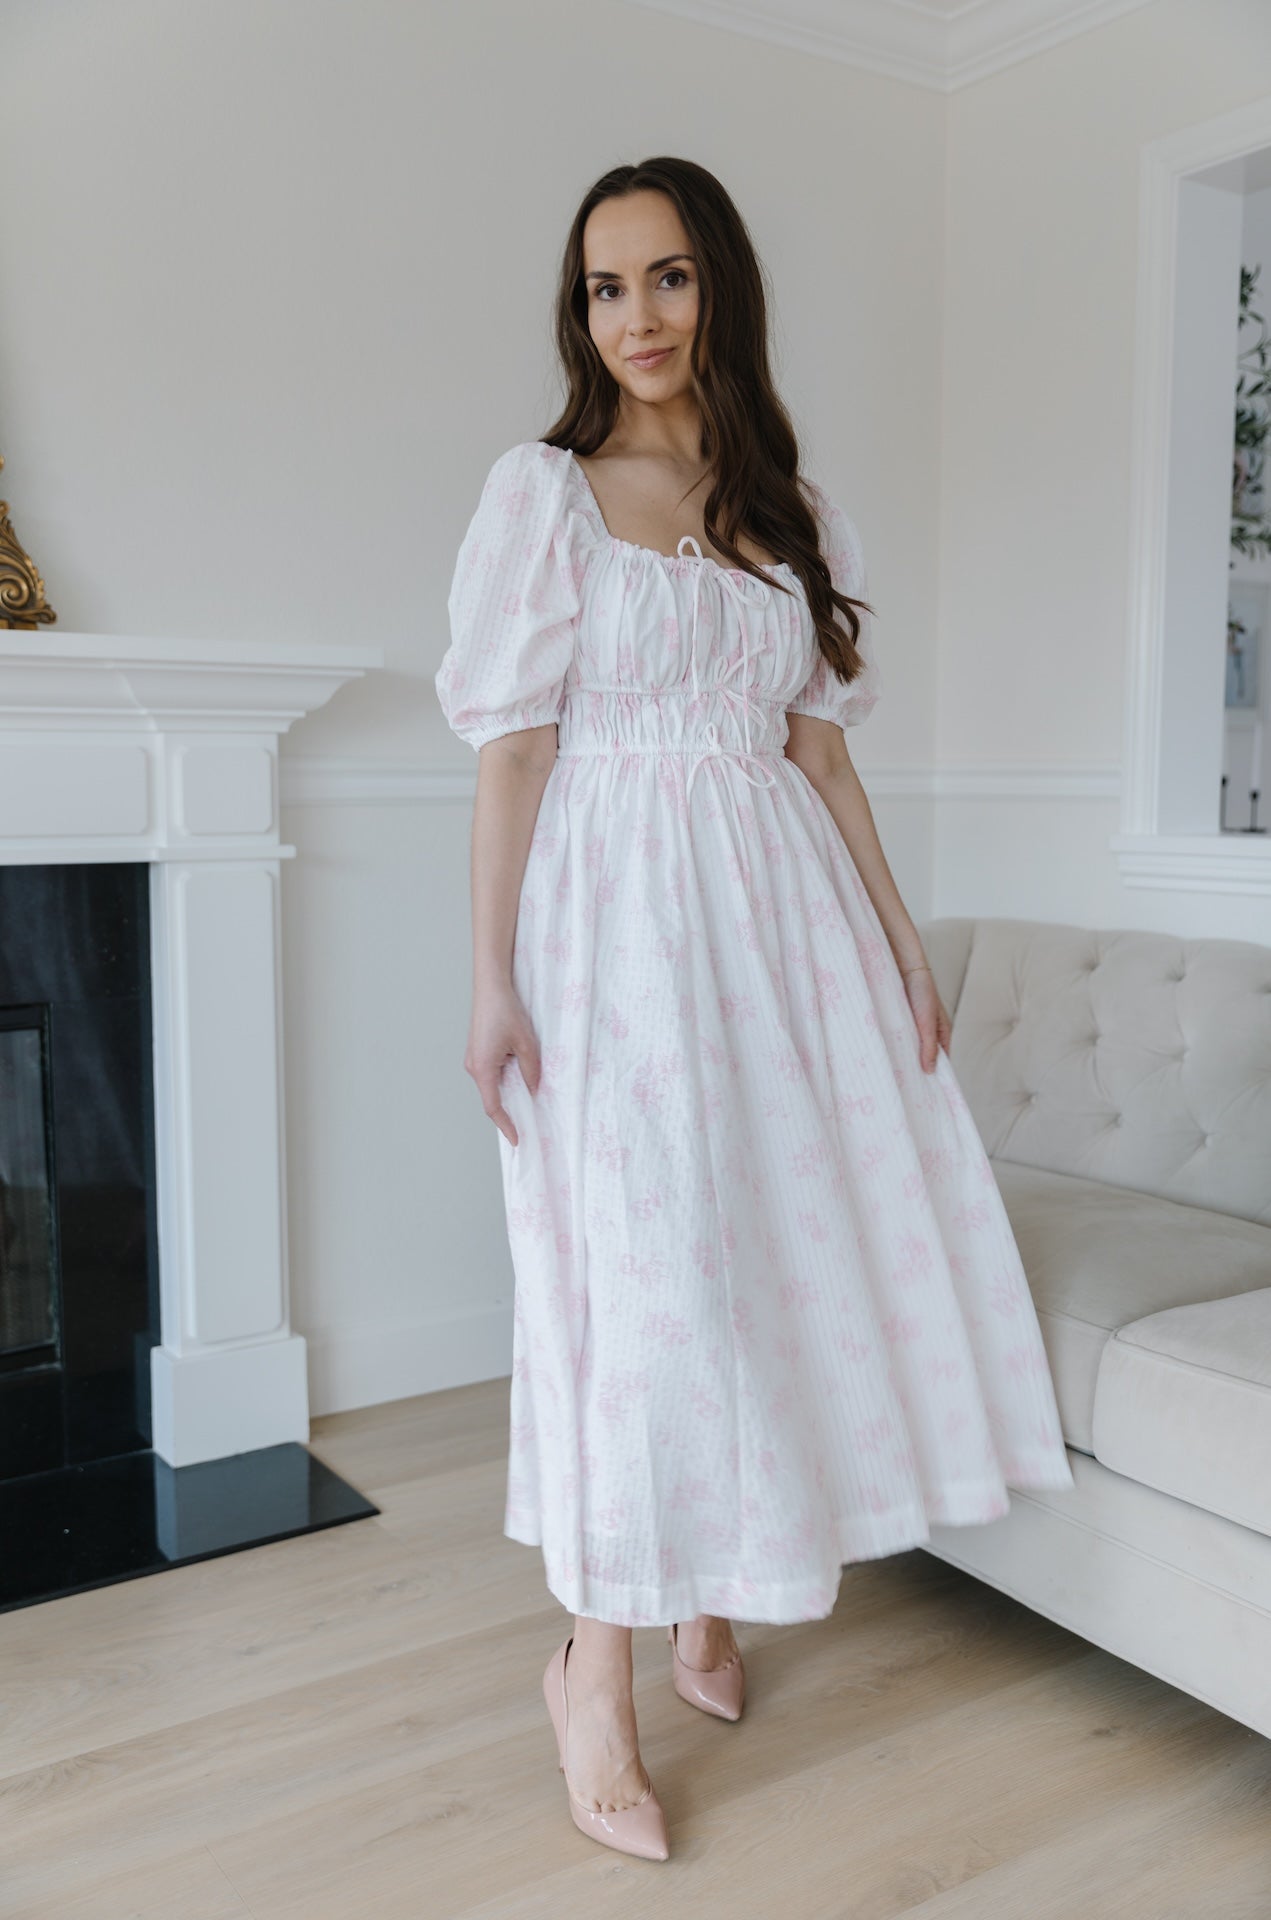 pink and white floral dress with puff sleeves and midi long length